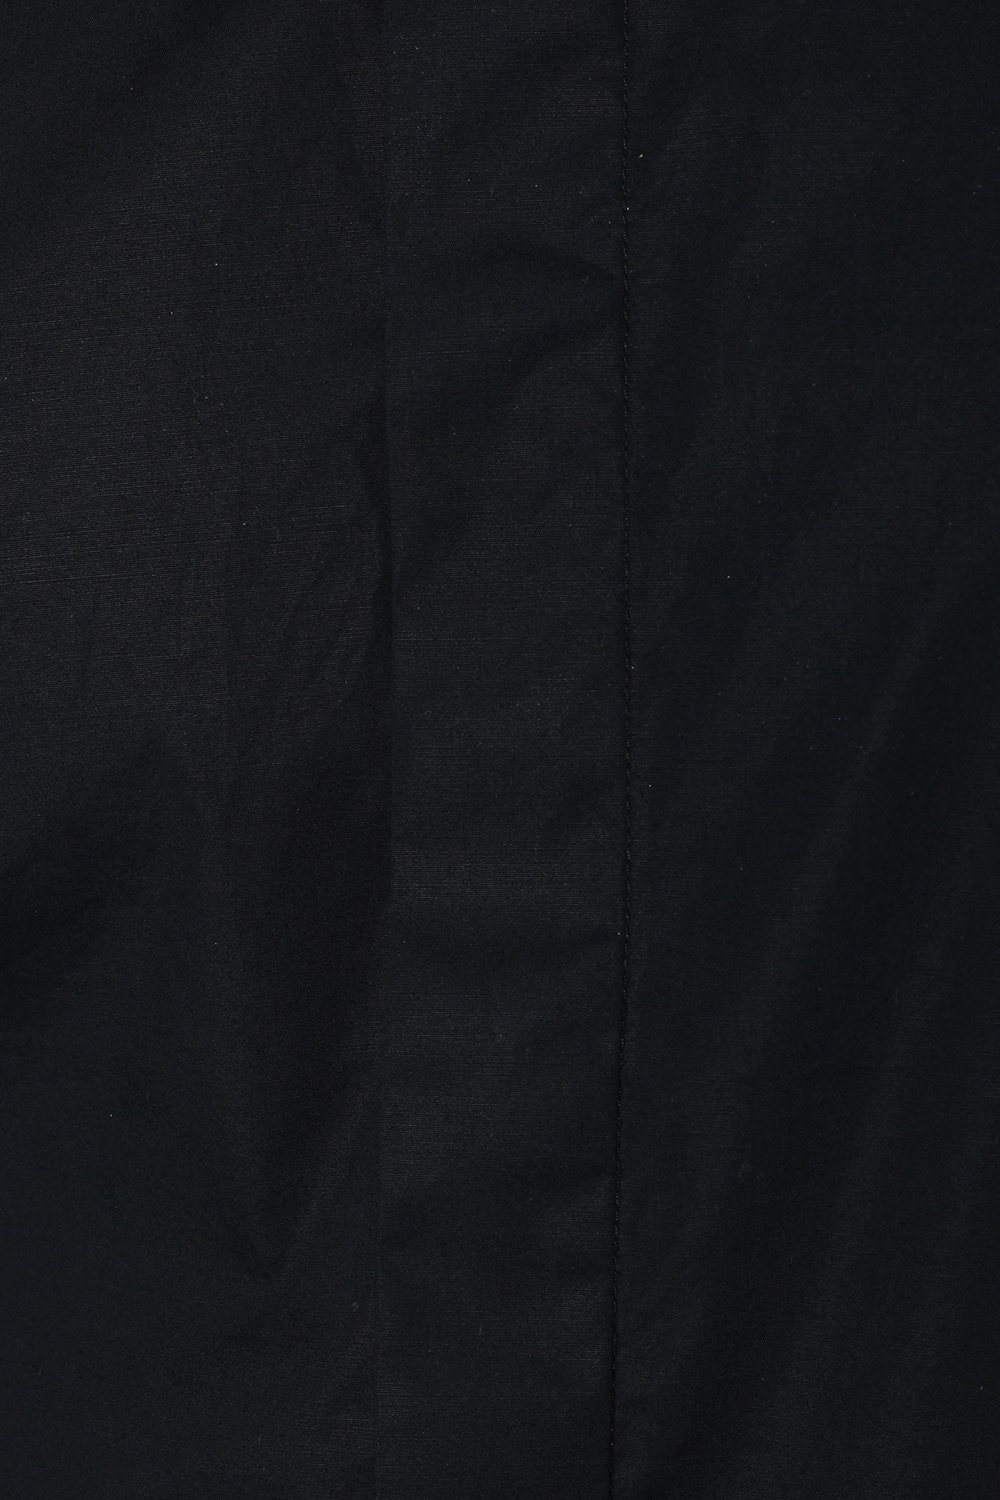 Diesel ‘S-NAP’ shirt with concealed placket